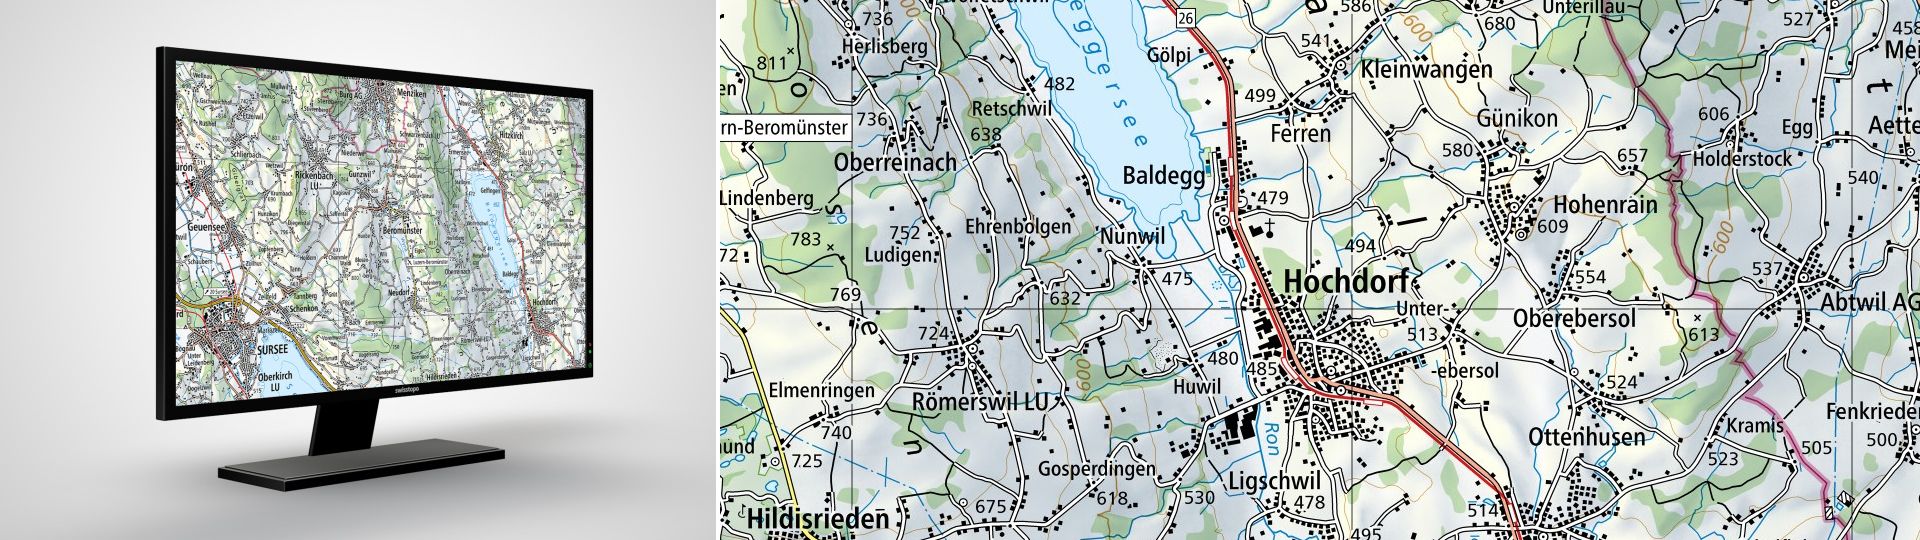 Swiss Map Raster 100: national mapping in digital raster format 1:100,000